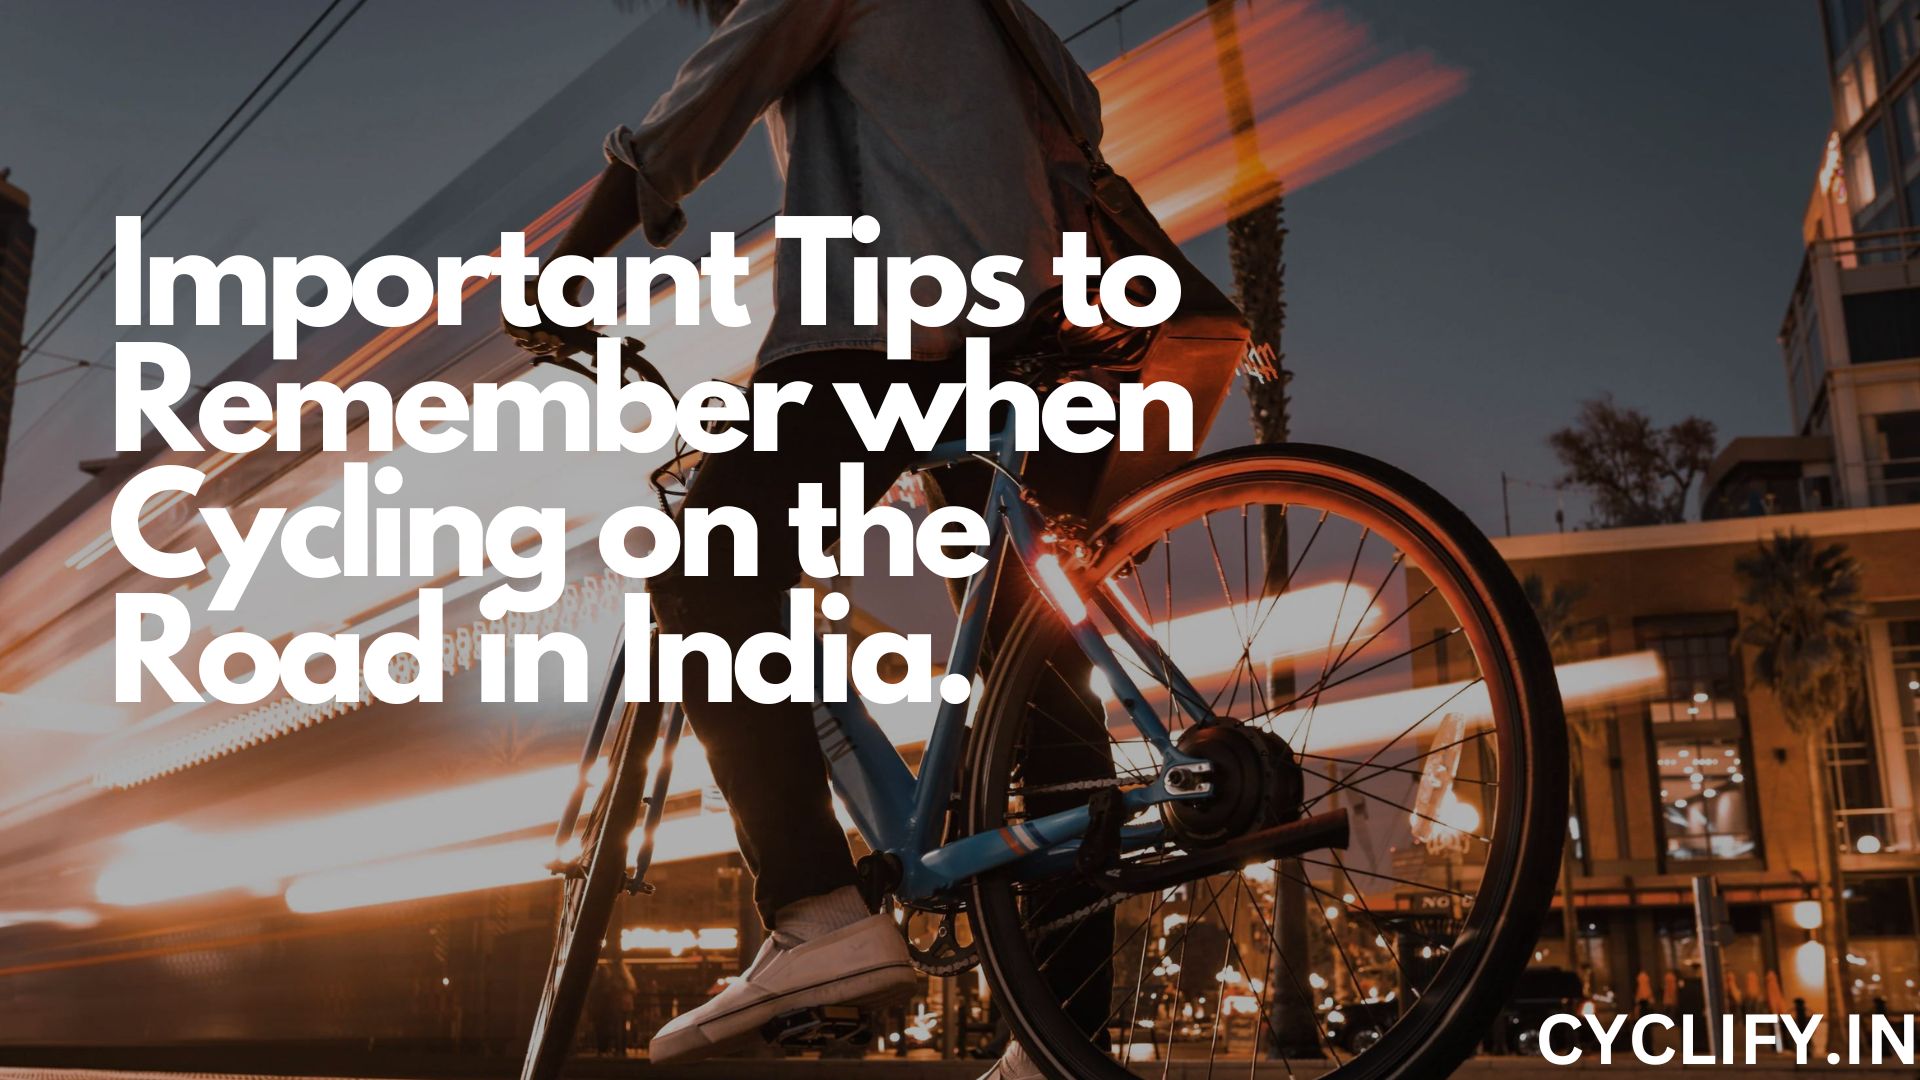 Tips to Remember when Cycling on Road in India